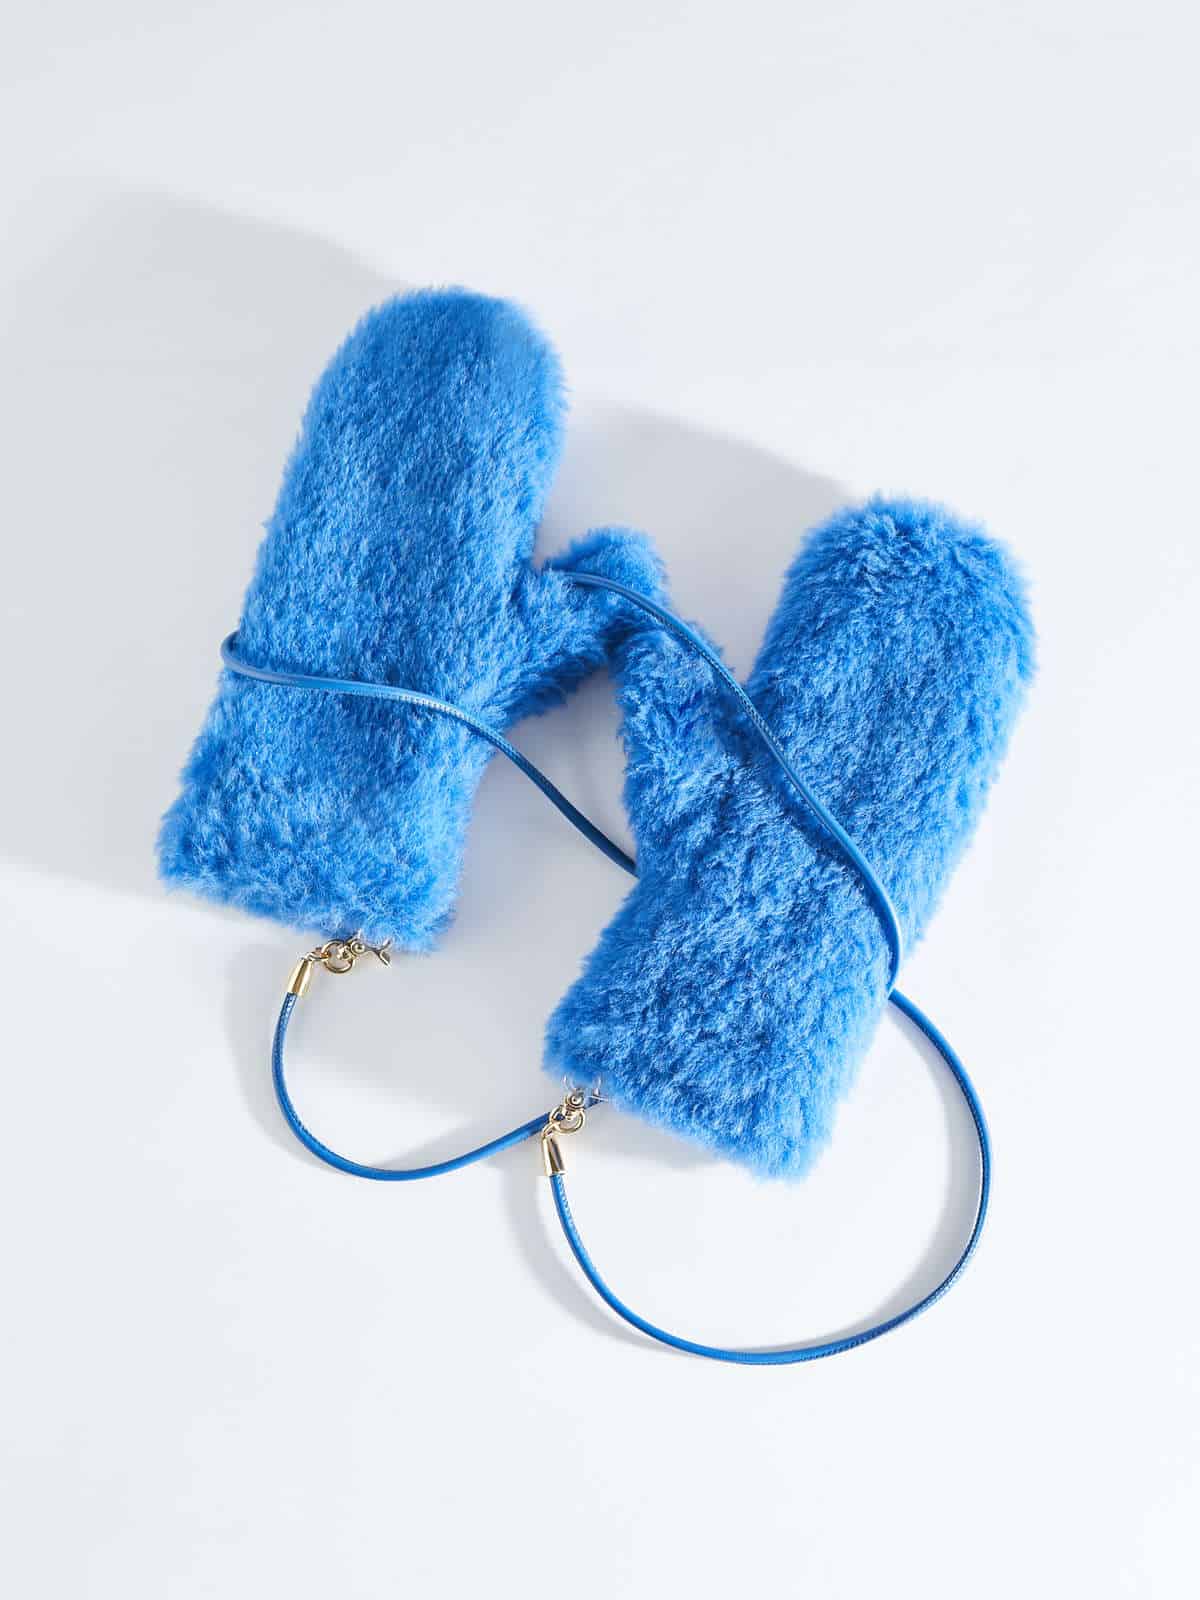 Max Mara lures: teddy bear, plush coats, handbags and other winter  accessories